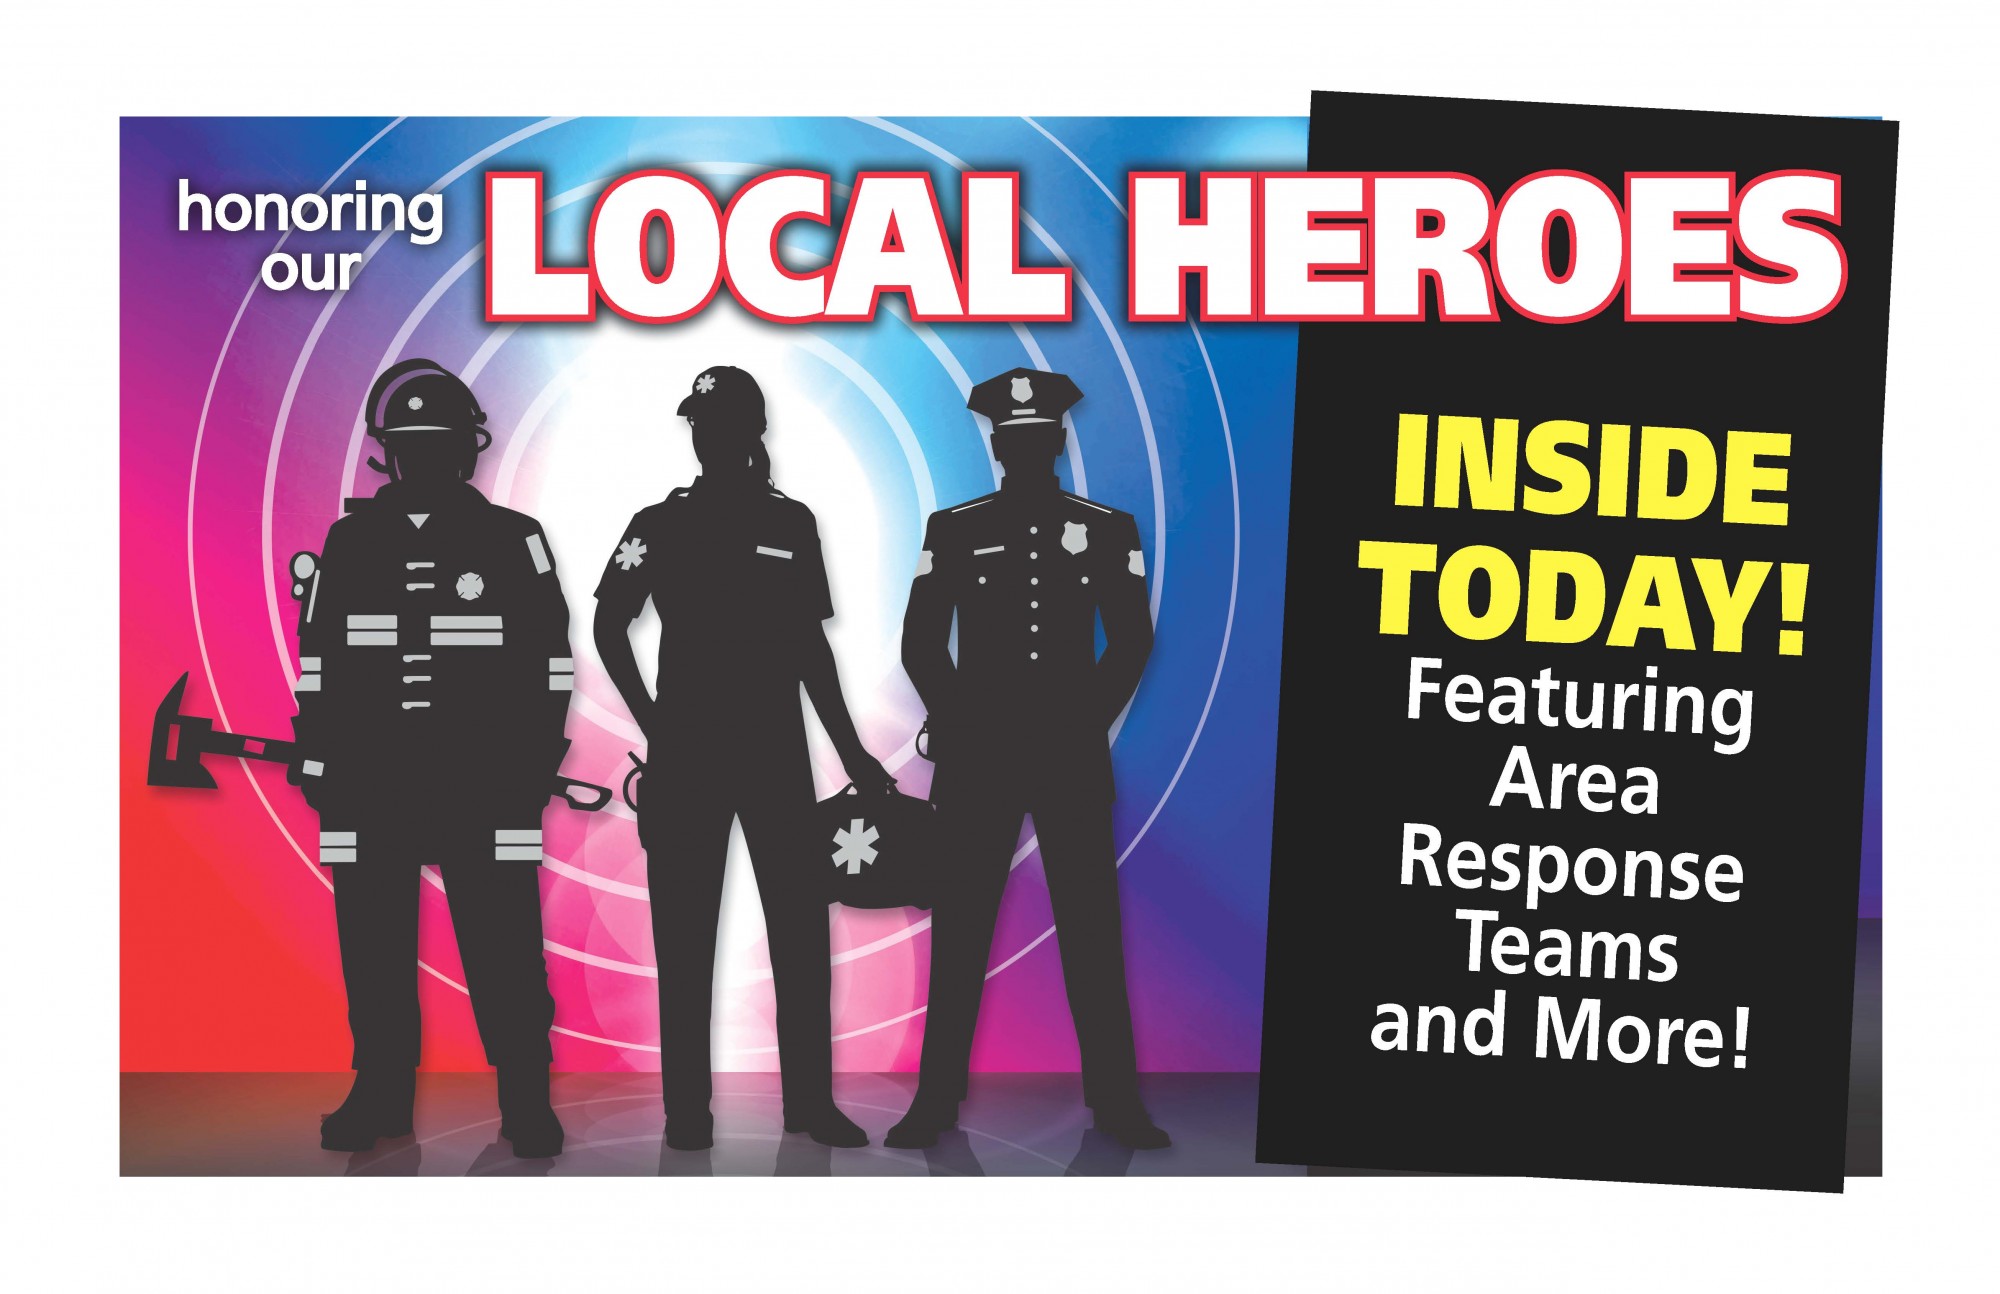 Idea #30 of 50 Days of Ideas! HONORING OUR LOCAL HEROES!